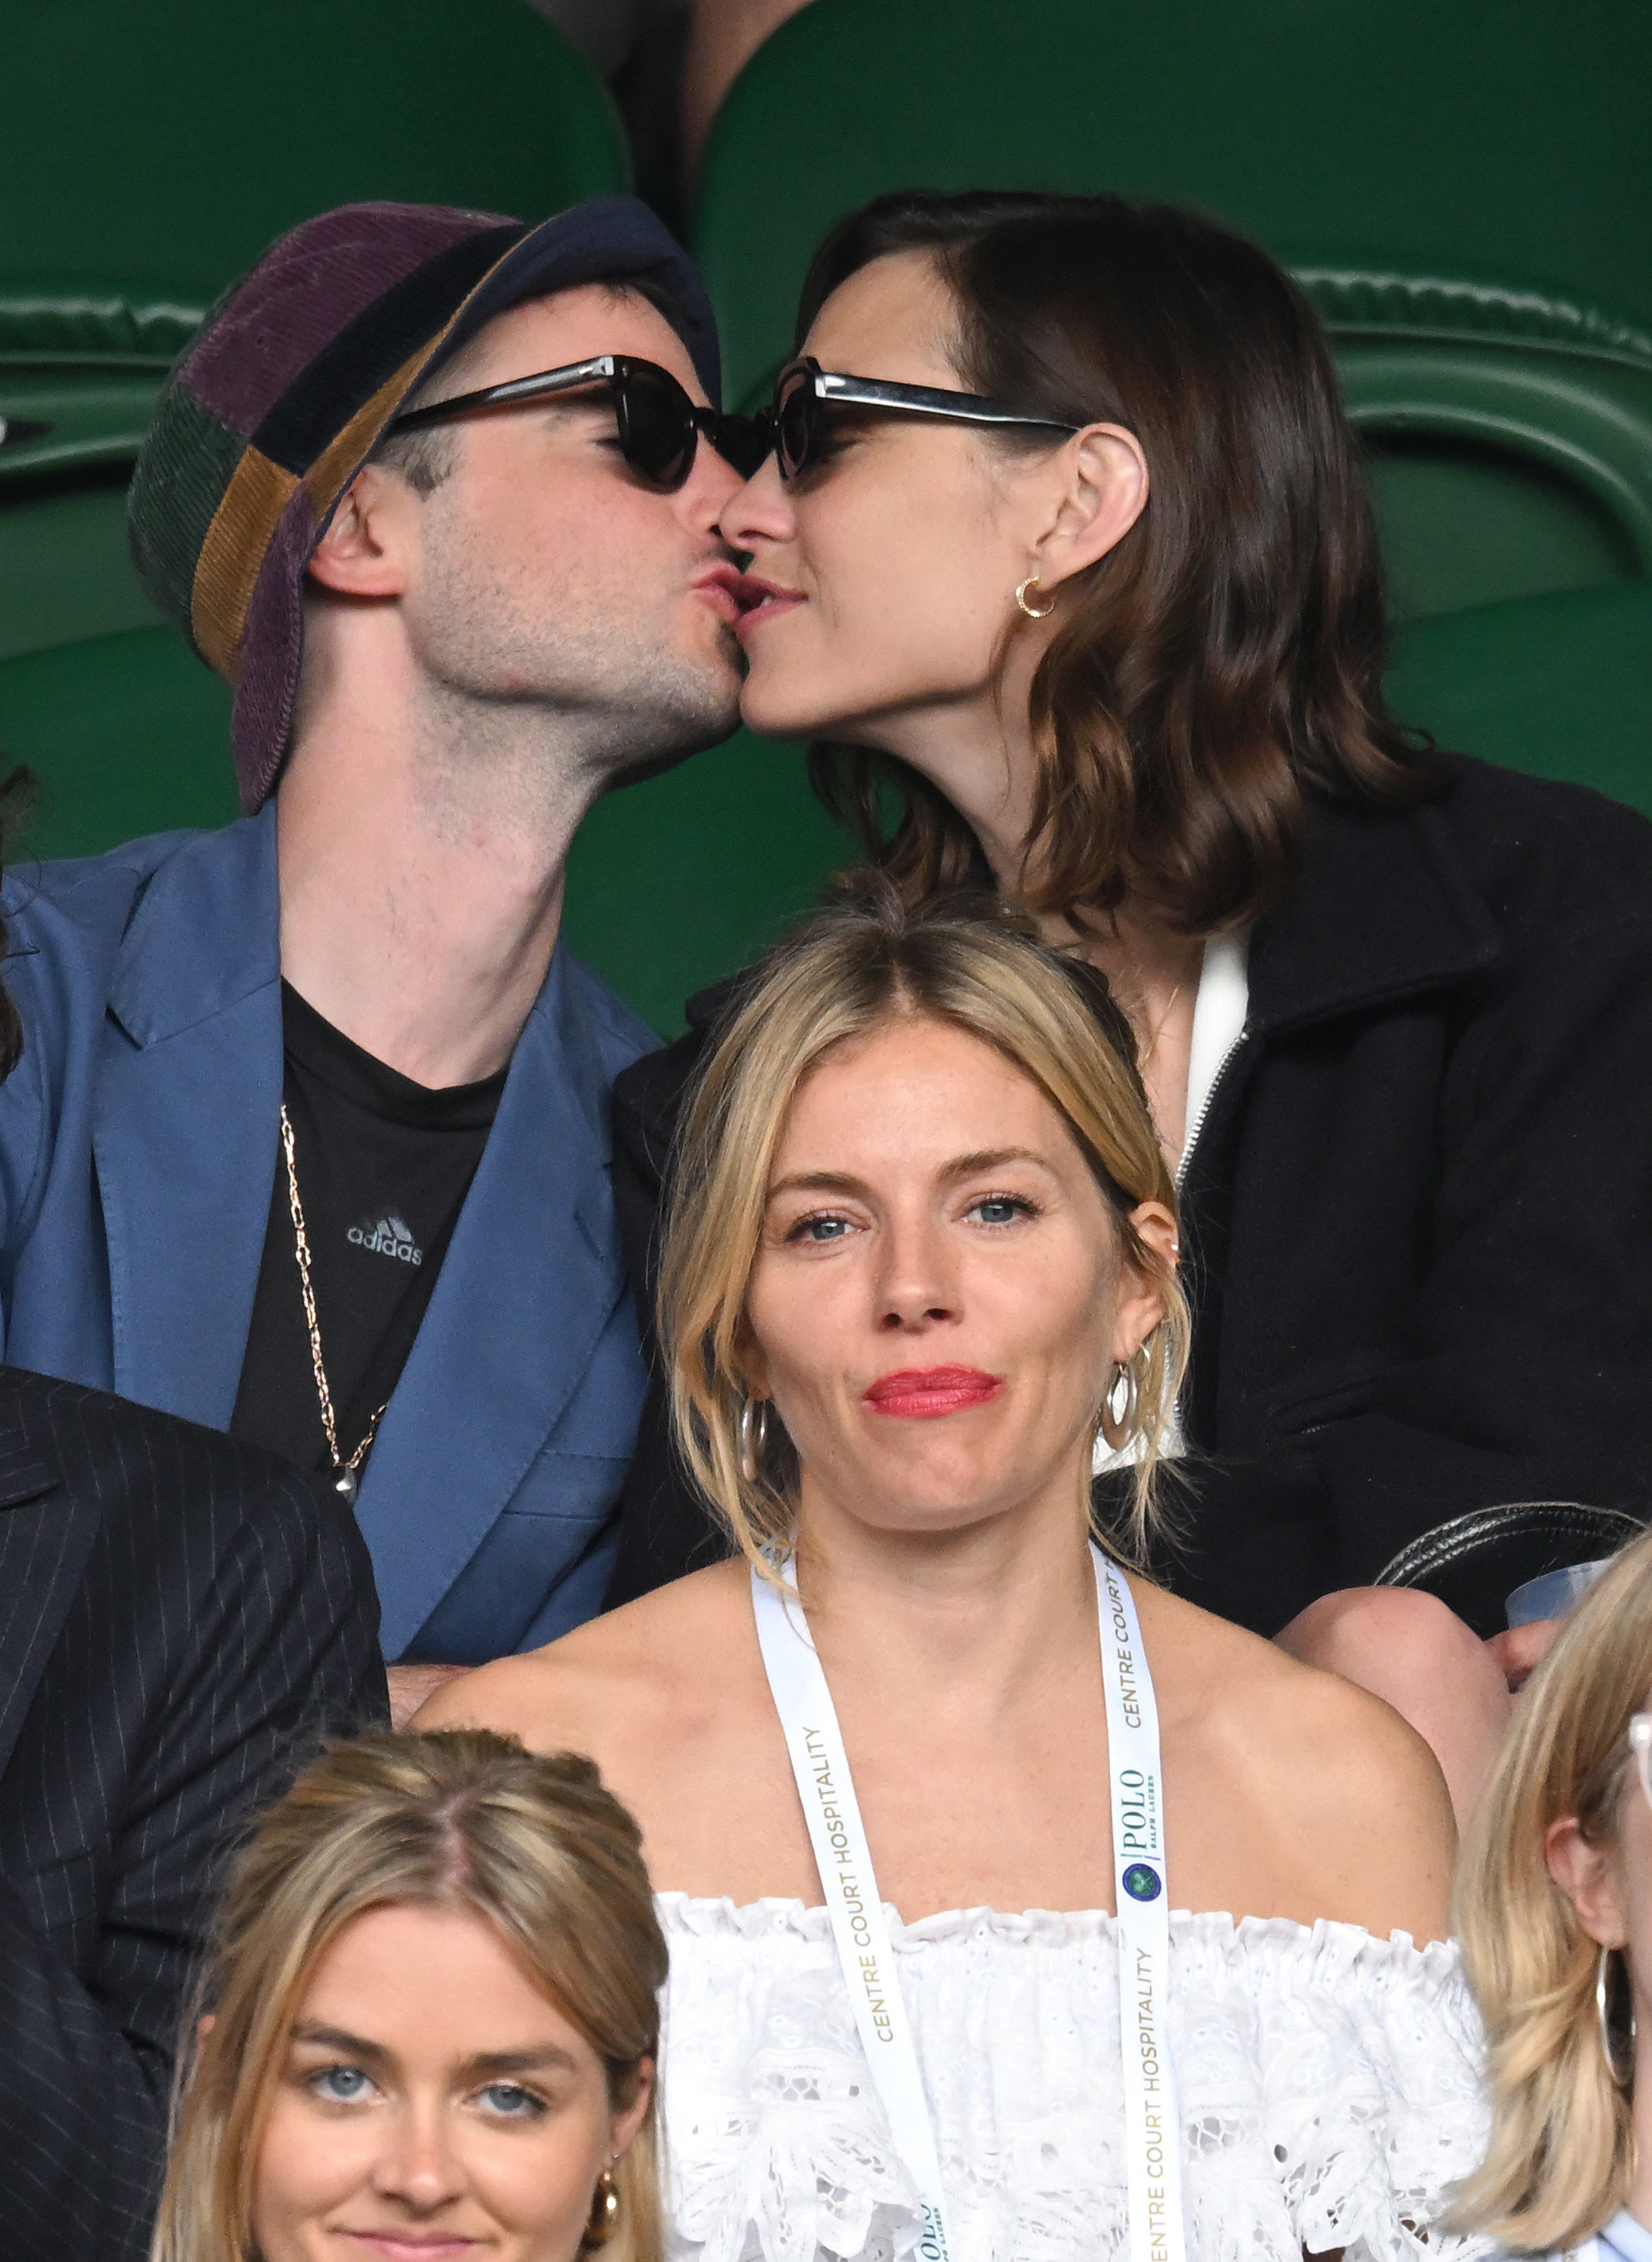 Tom and Alexa share a kiss while Sienna sits in front of them